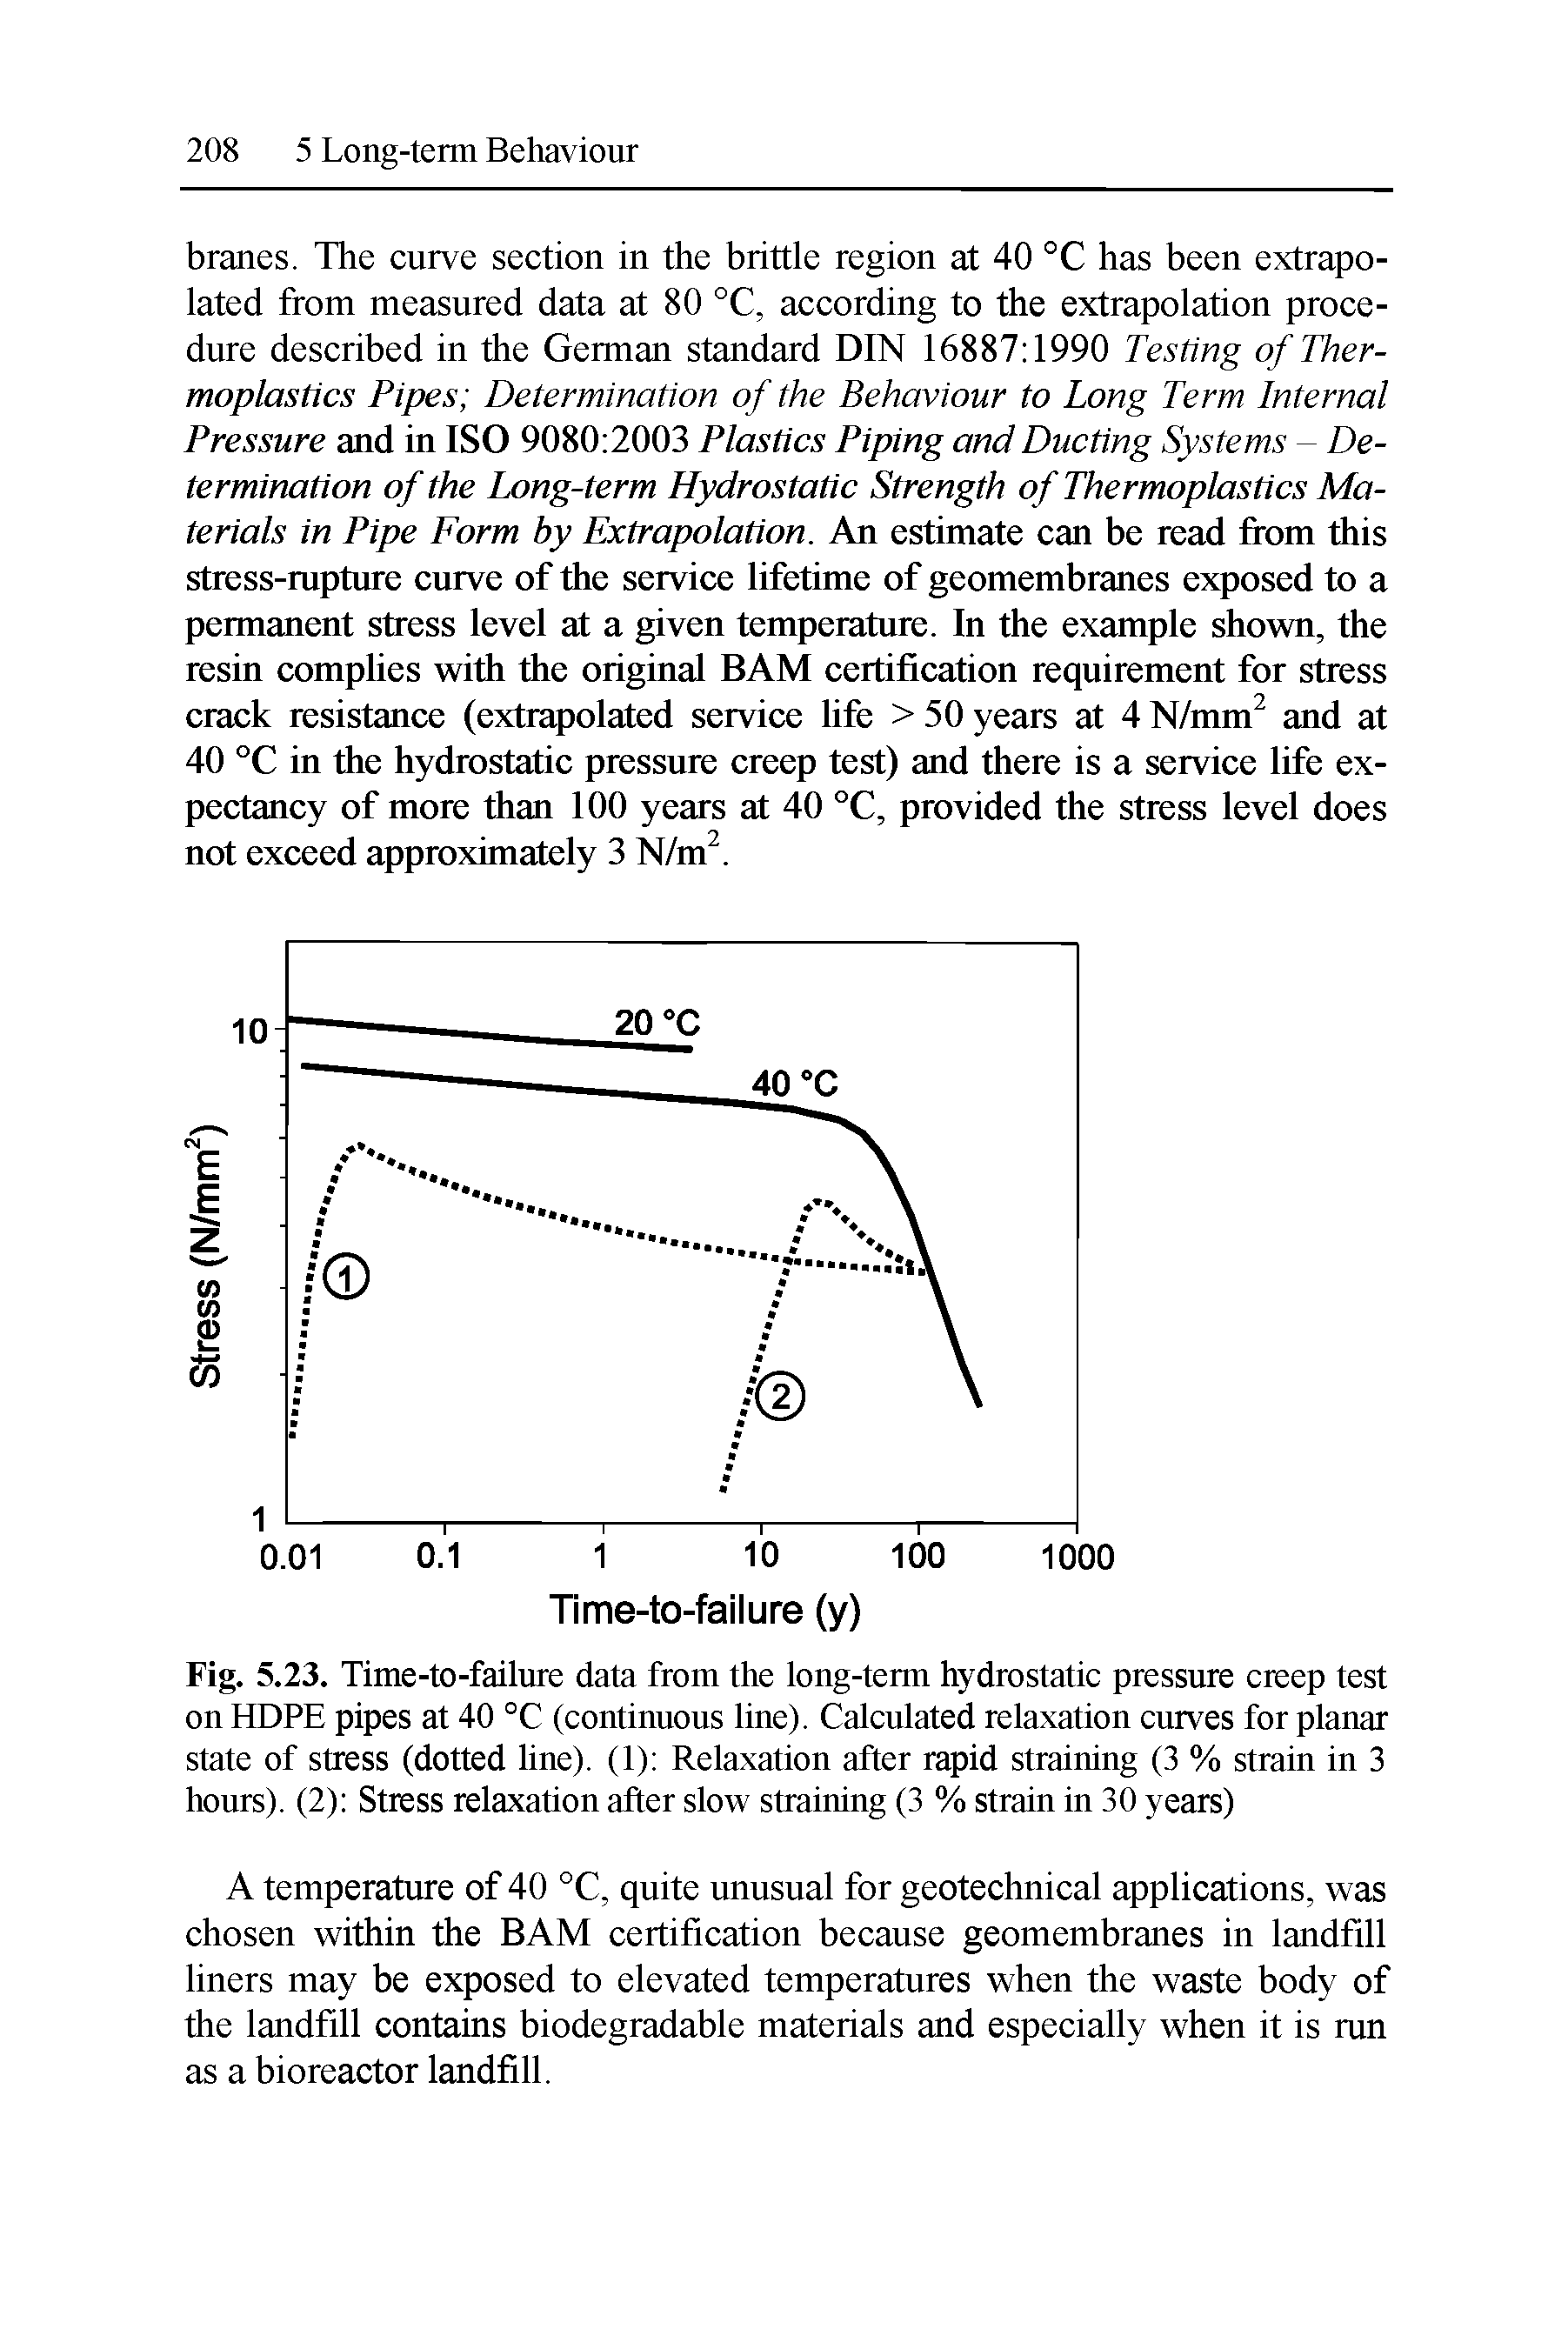 Fig. 5.23. Time-to-failure data from the long-term hydrostatic pressure creep test on HOPE pipes at 40 °C (continuous line). Calculated relaxation curves for planar state of stress (dotted line). (1) Relaxation after rapid straining (3 % strain in 3 hours). (2) Stress relaxation after slow straining (3 % strain in 30 years)...